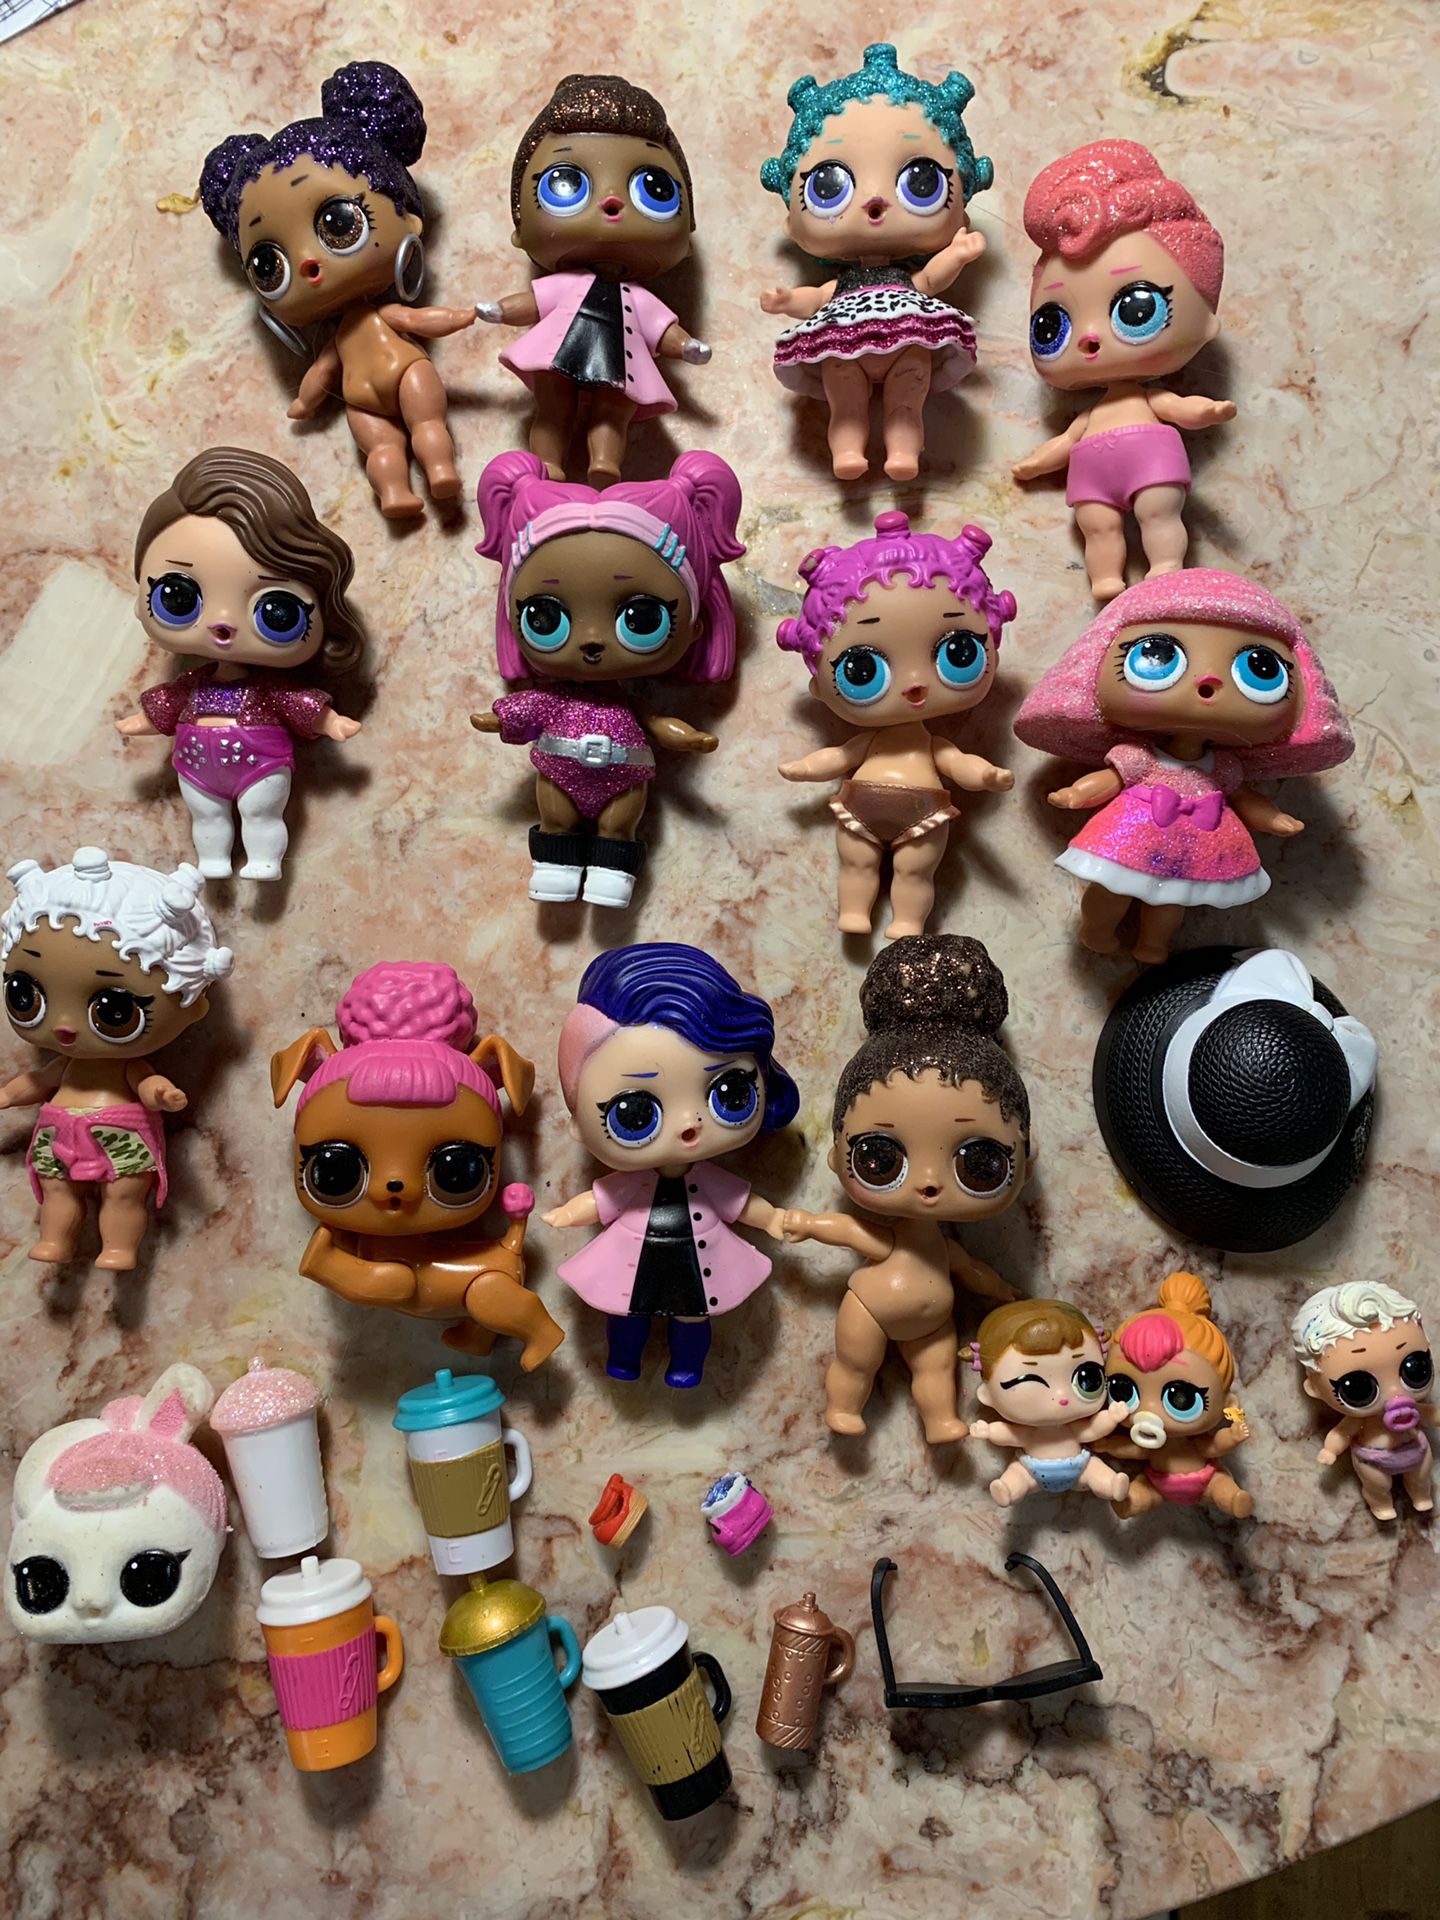 Lot of LOL dolls with accessories